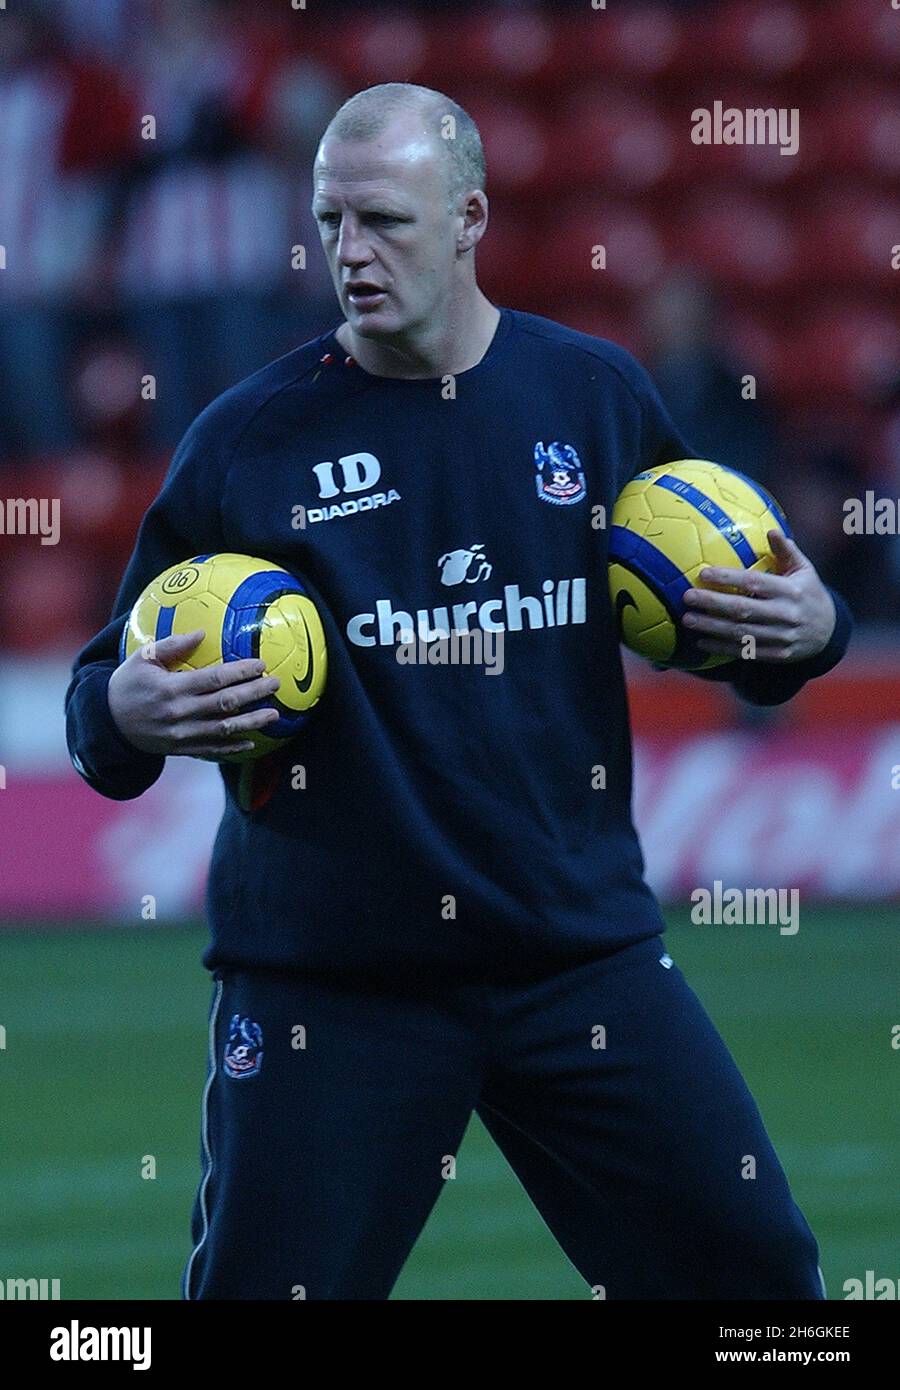 SOUTHAMPTON V PALACE CRYSTAL PALACE MANAGER IAN DOWIE. PIC MIKE WALKER, 2004 Stock Photo